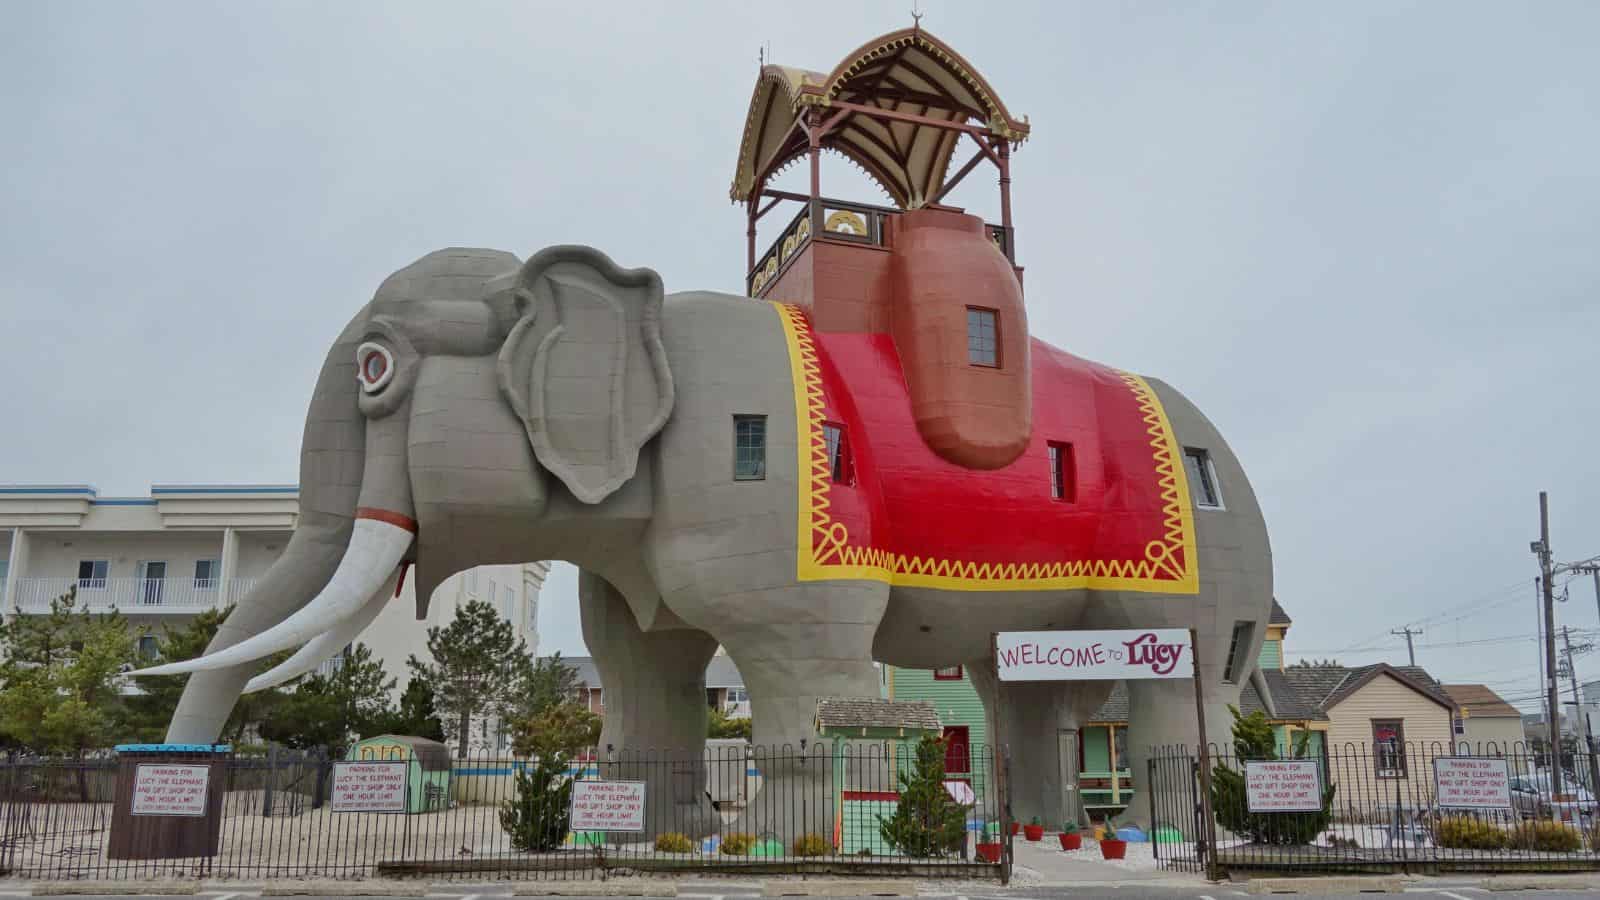 <p>Lucy the Elephant has the charm of being unusual but falls short of breathtaking. Generally considered a one-time visit kind of place, it’s more novelty than must-see marvel.</p>